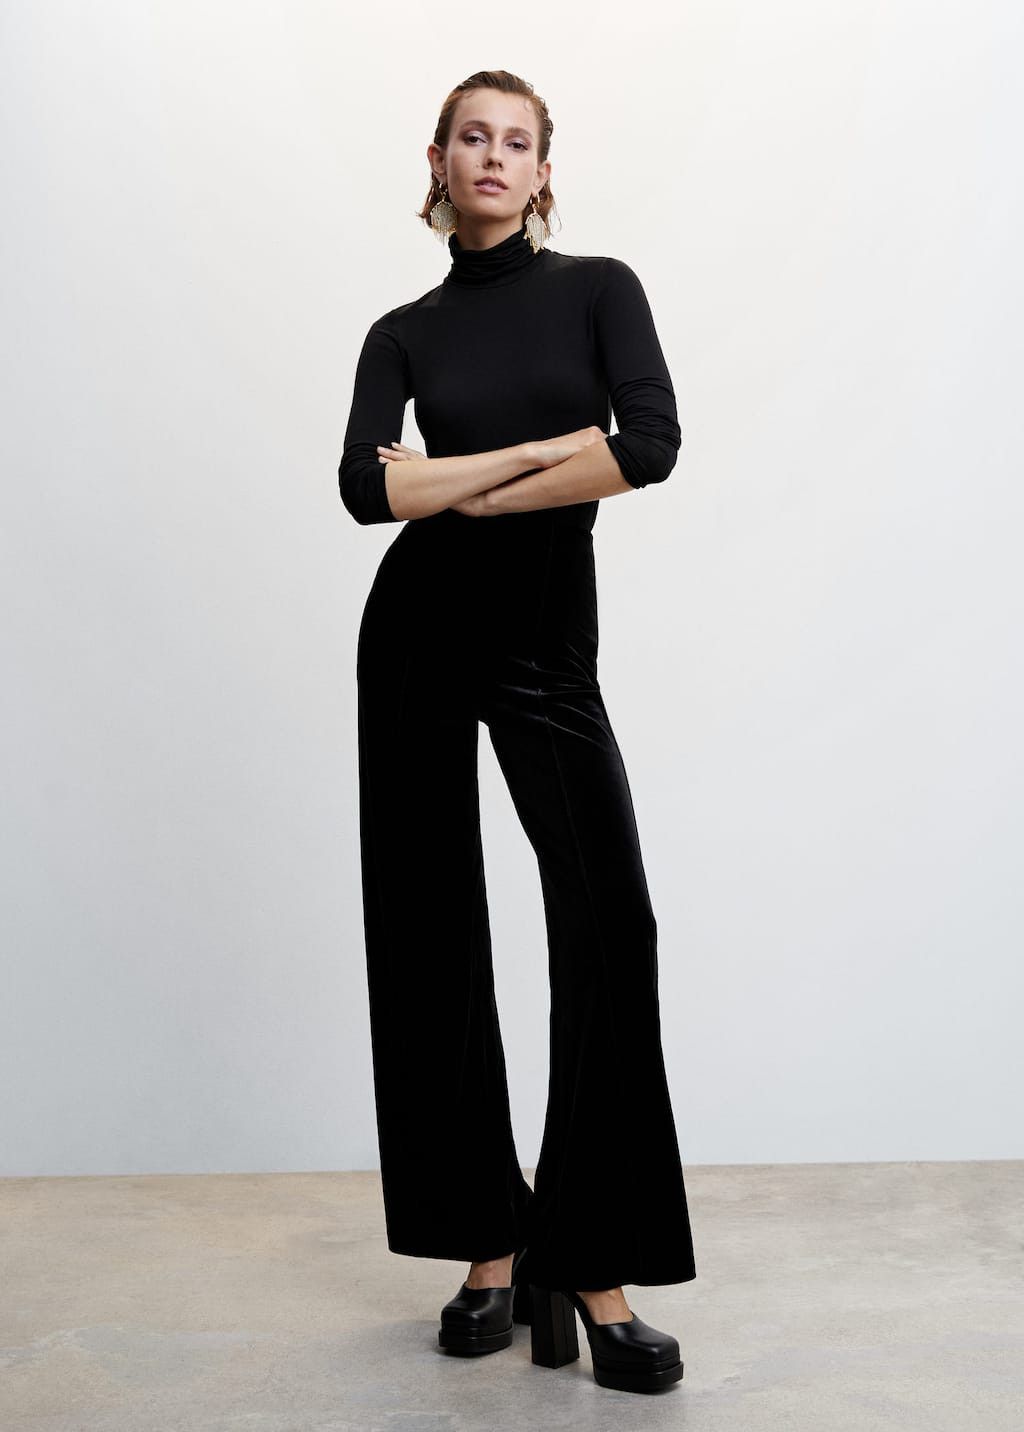 Velvet palazzo pants | Black Work Pants | Work Wear Style | Business Casual | Winter Outfit | MANGO (US)